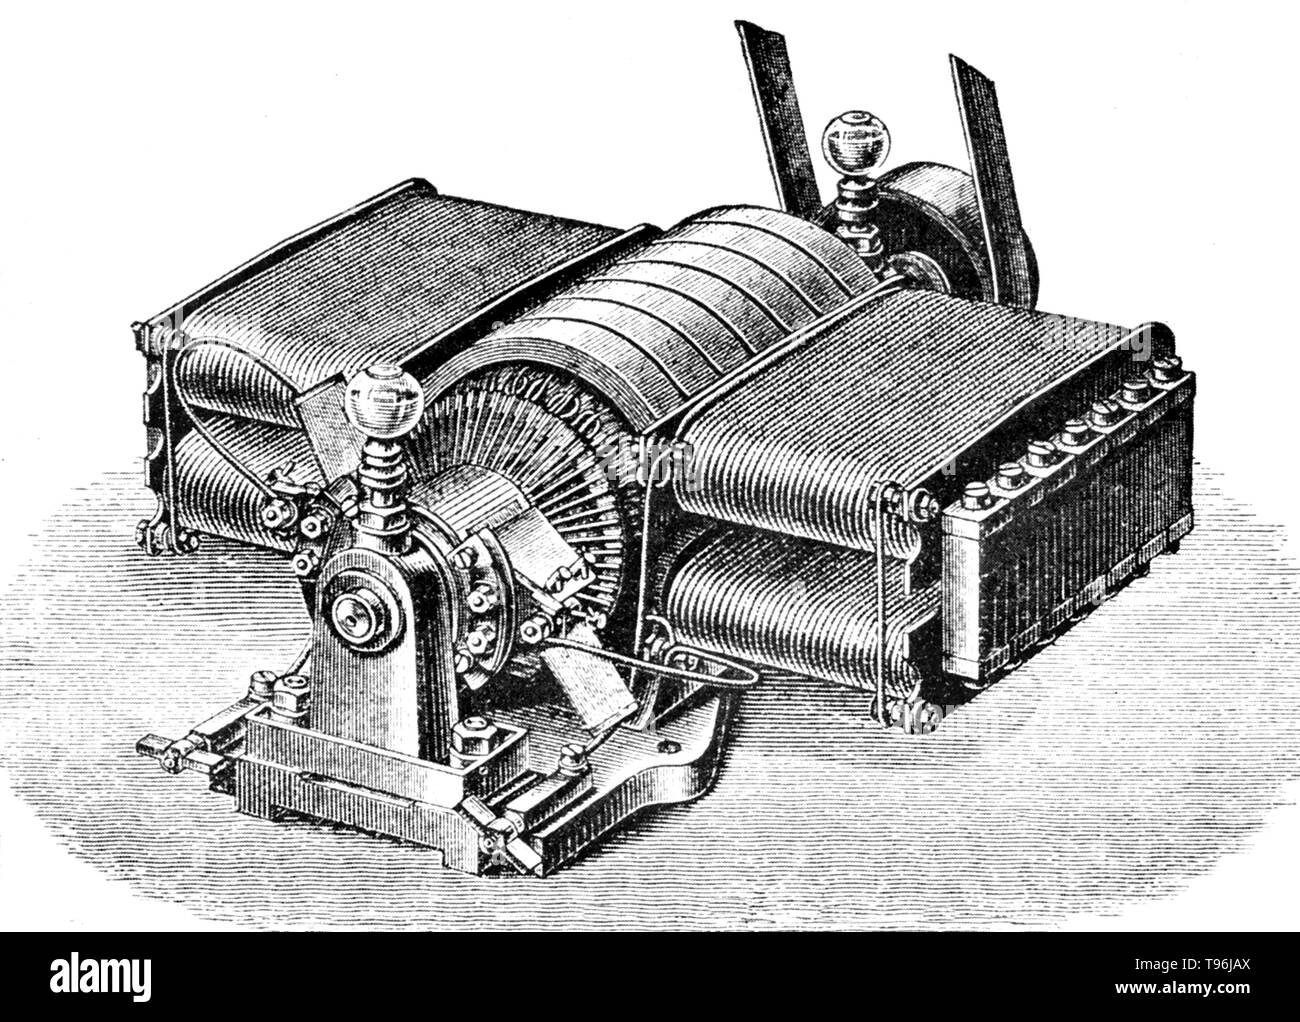 An early type of Siemens' Self Exciting dynamo (1873) with drum-wound armature and bar commutator. A dynamo is an electrical generator that creates direct current using a commutator. Dynamos were the first electrical generators capable of delivering power for industry, and the foundation upon which many other later electric-power conversion devices were based, including the electric motor, the alternating-current alternator, and the rotary converter. Stock Photo